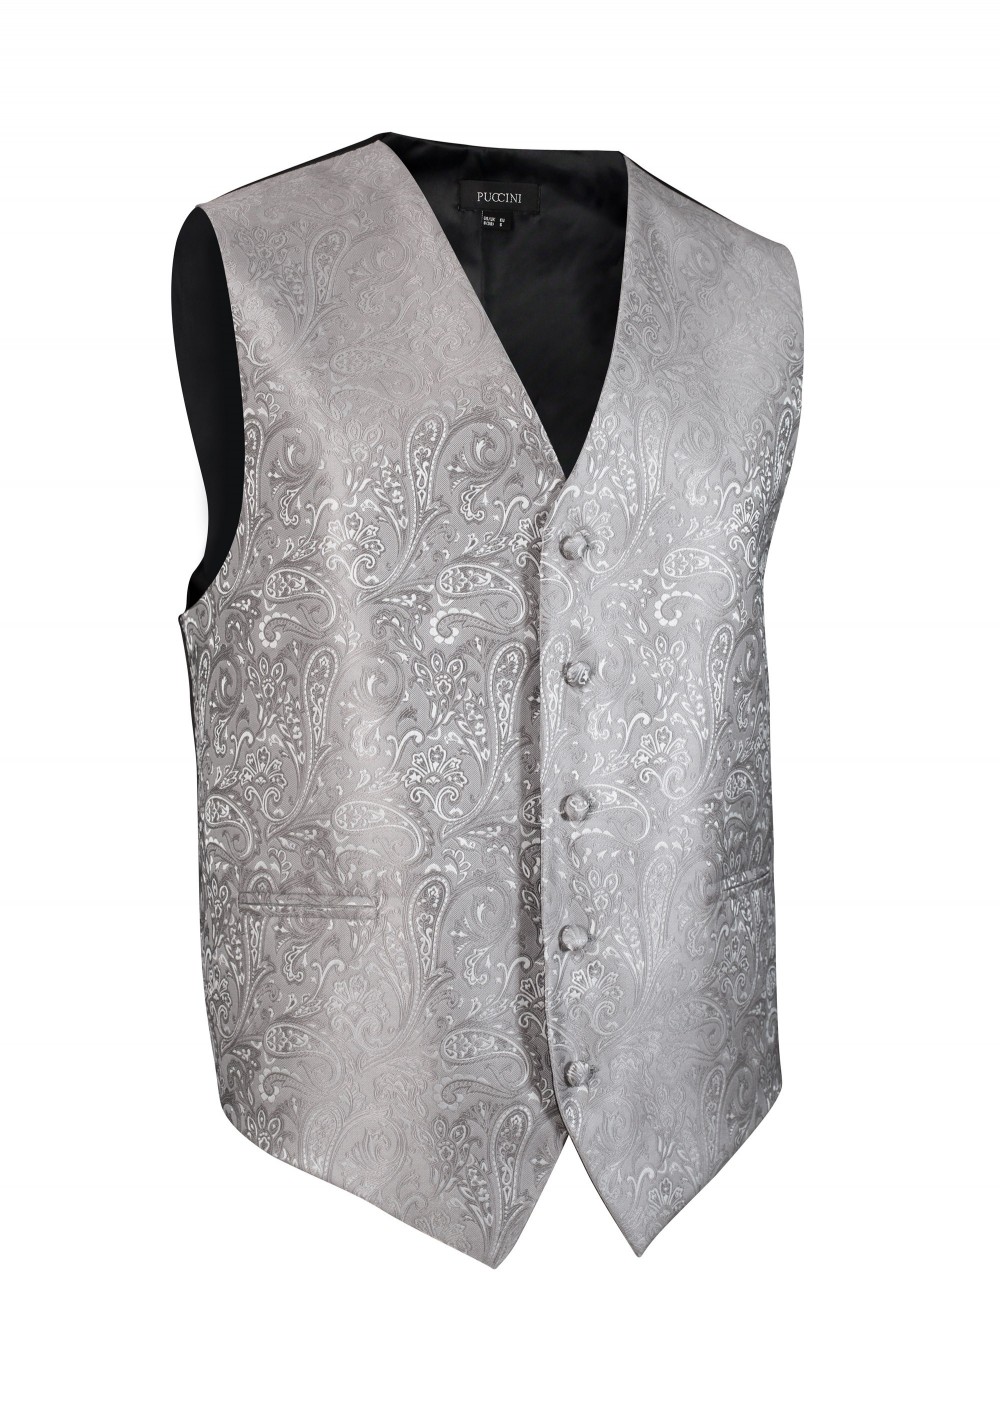 Formal Paisley Textured Vest in Shiny Silver